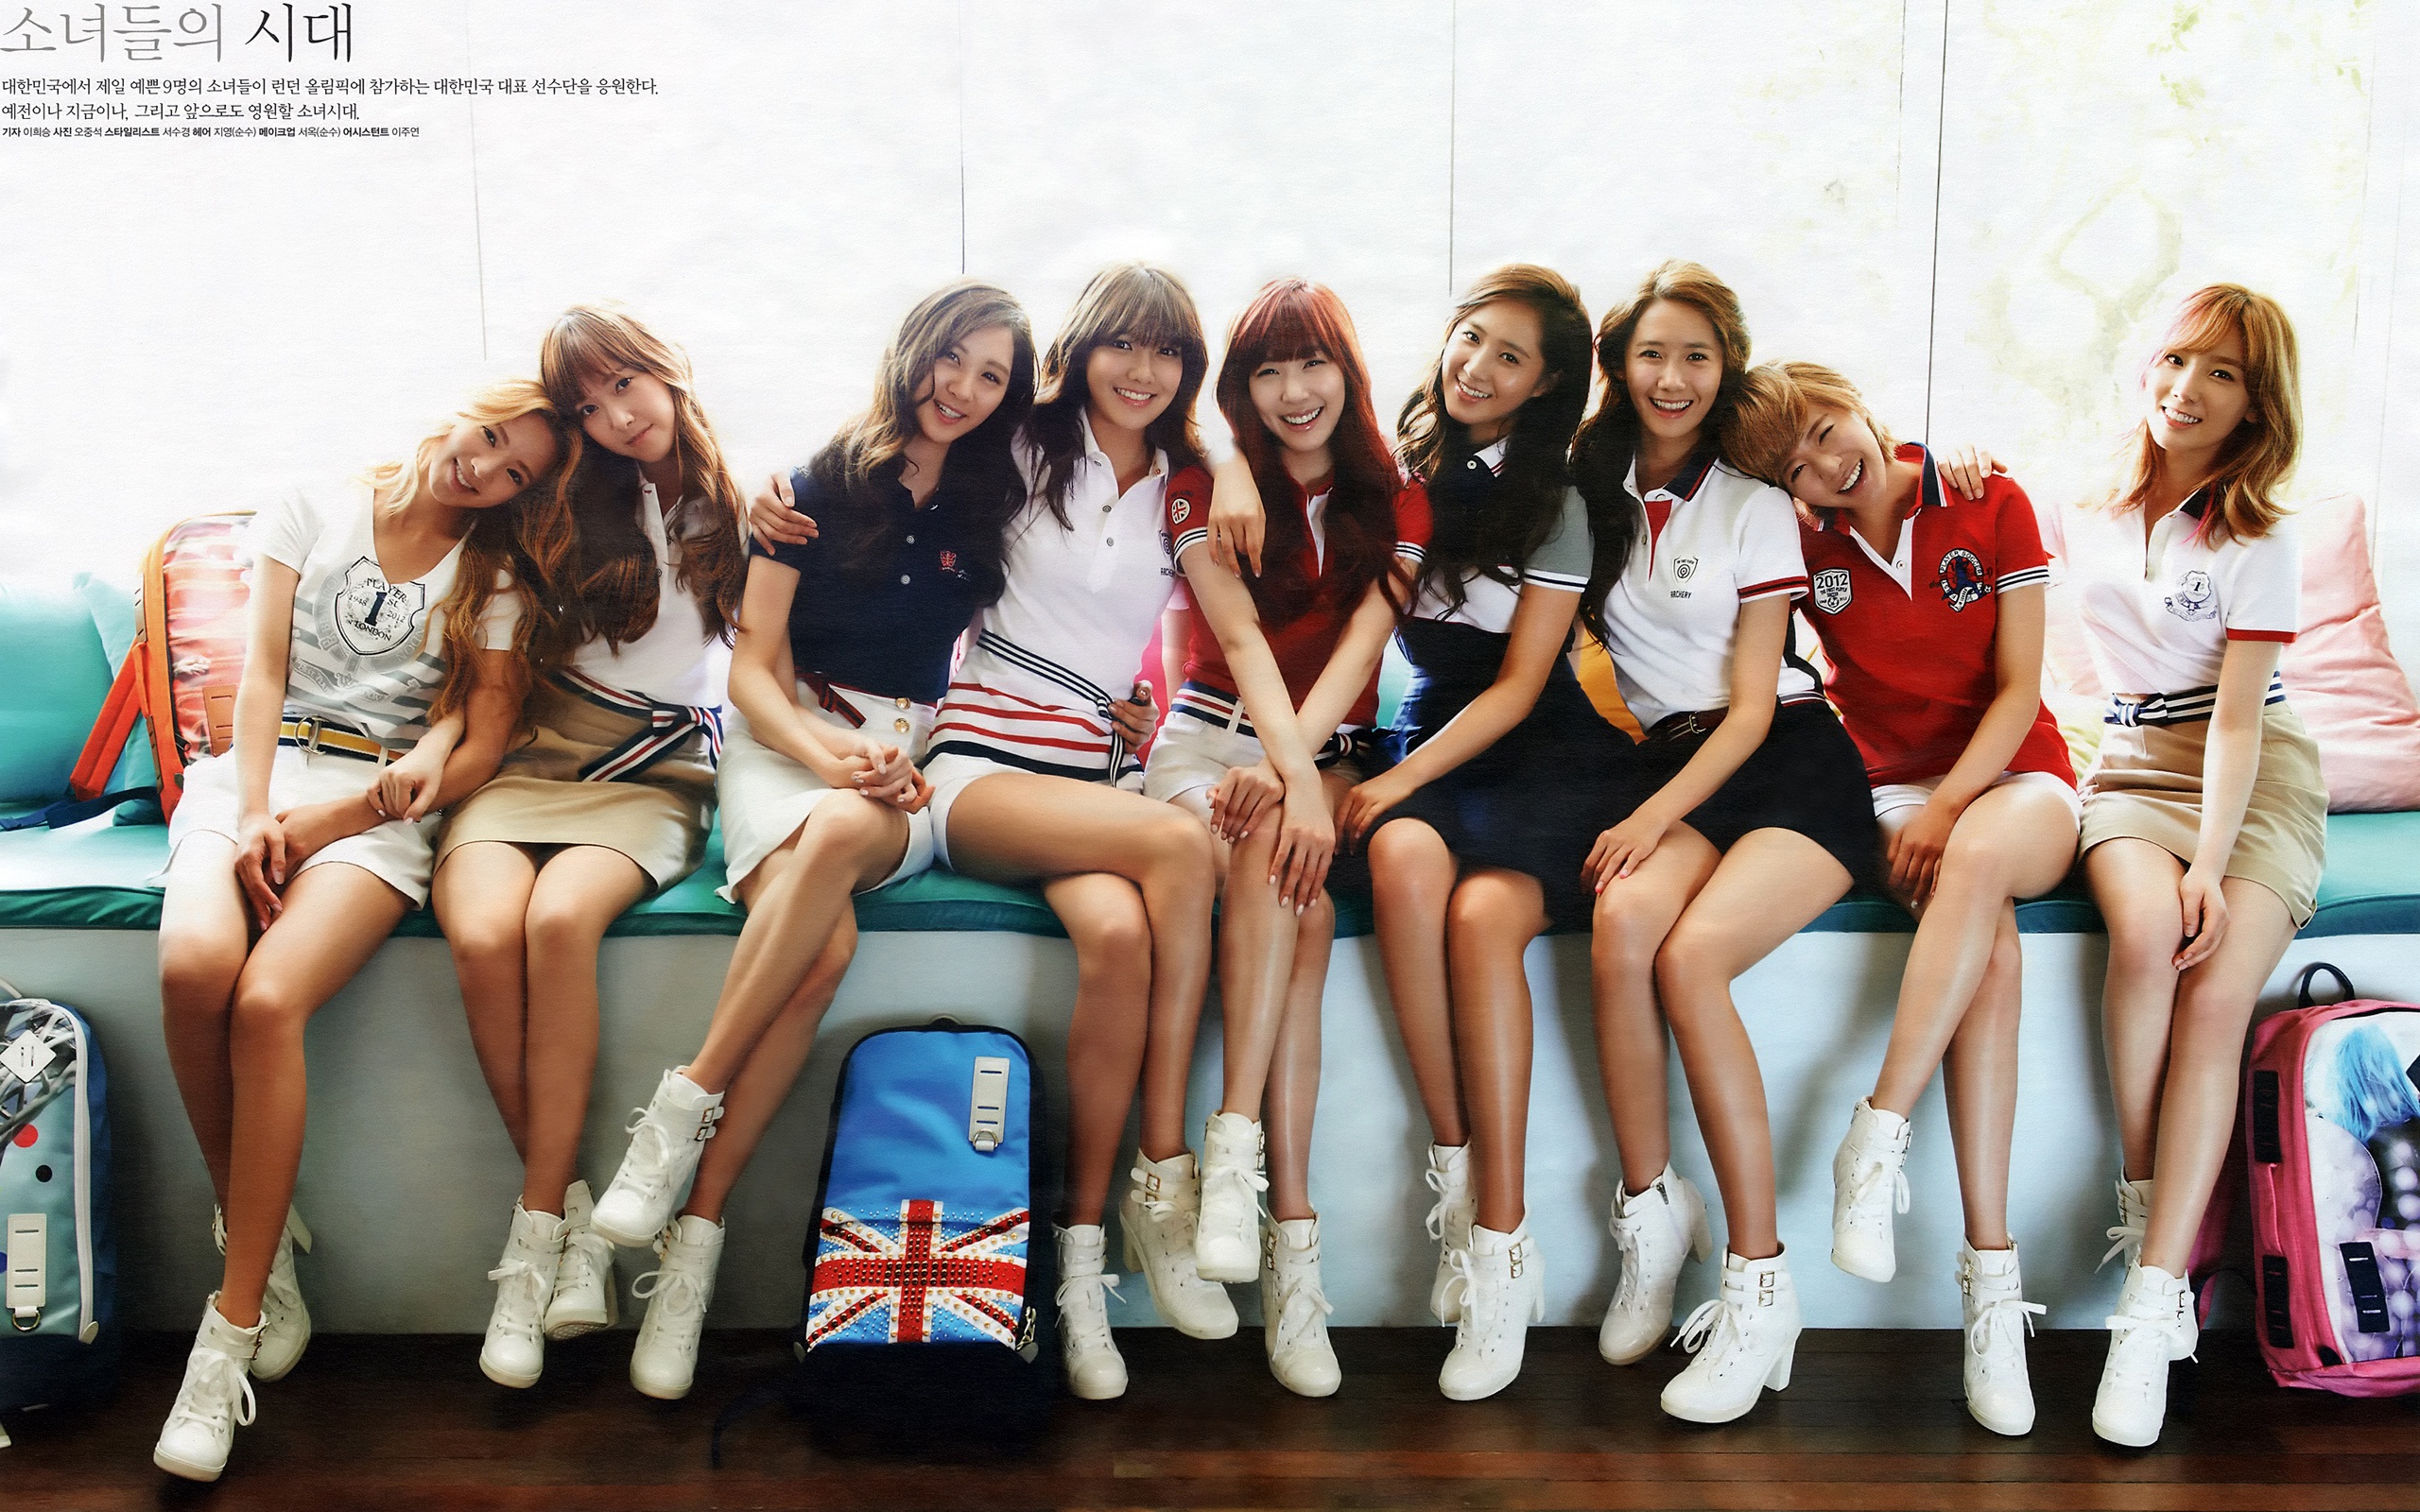 Girls Generation latest HD wallpapers collection #1 - 2560x1600